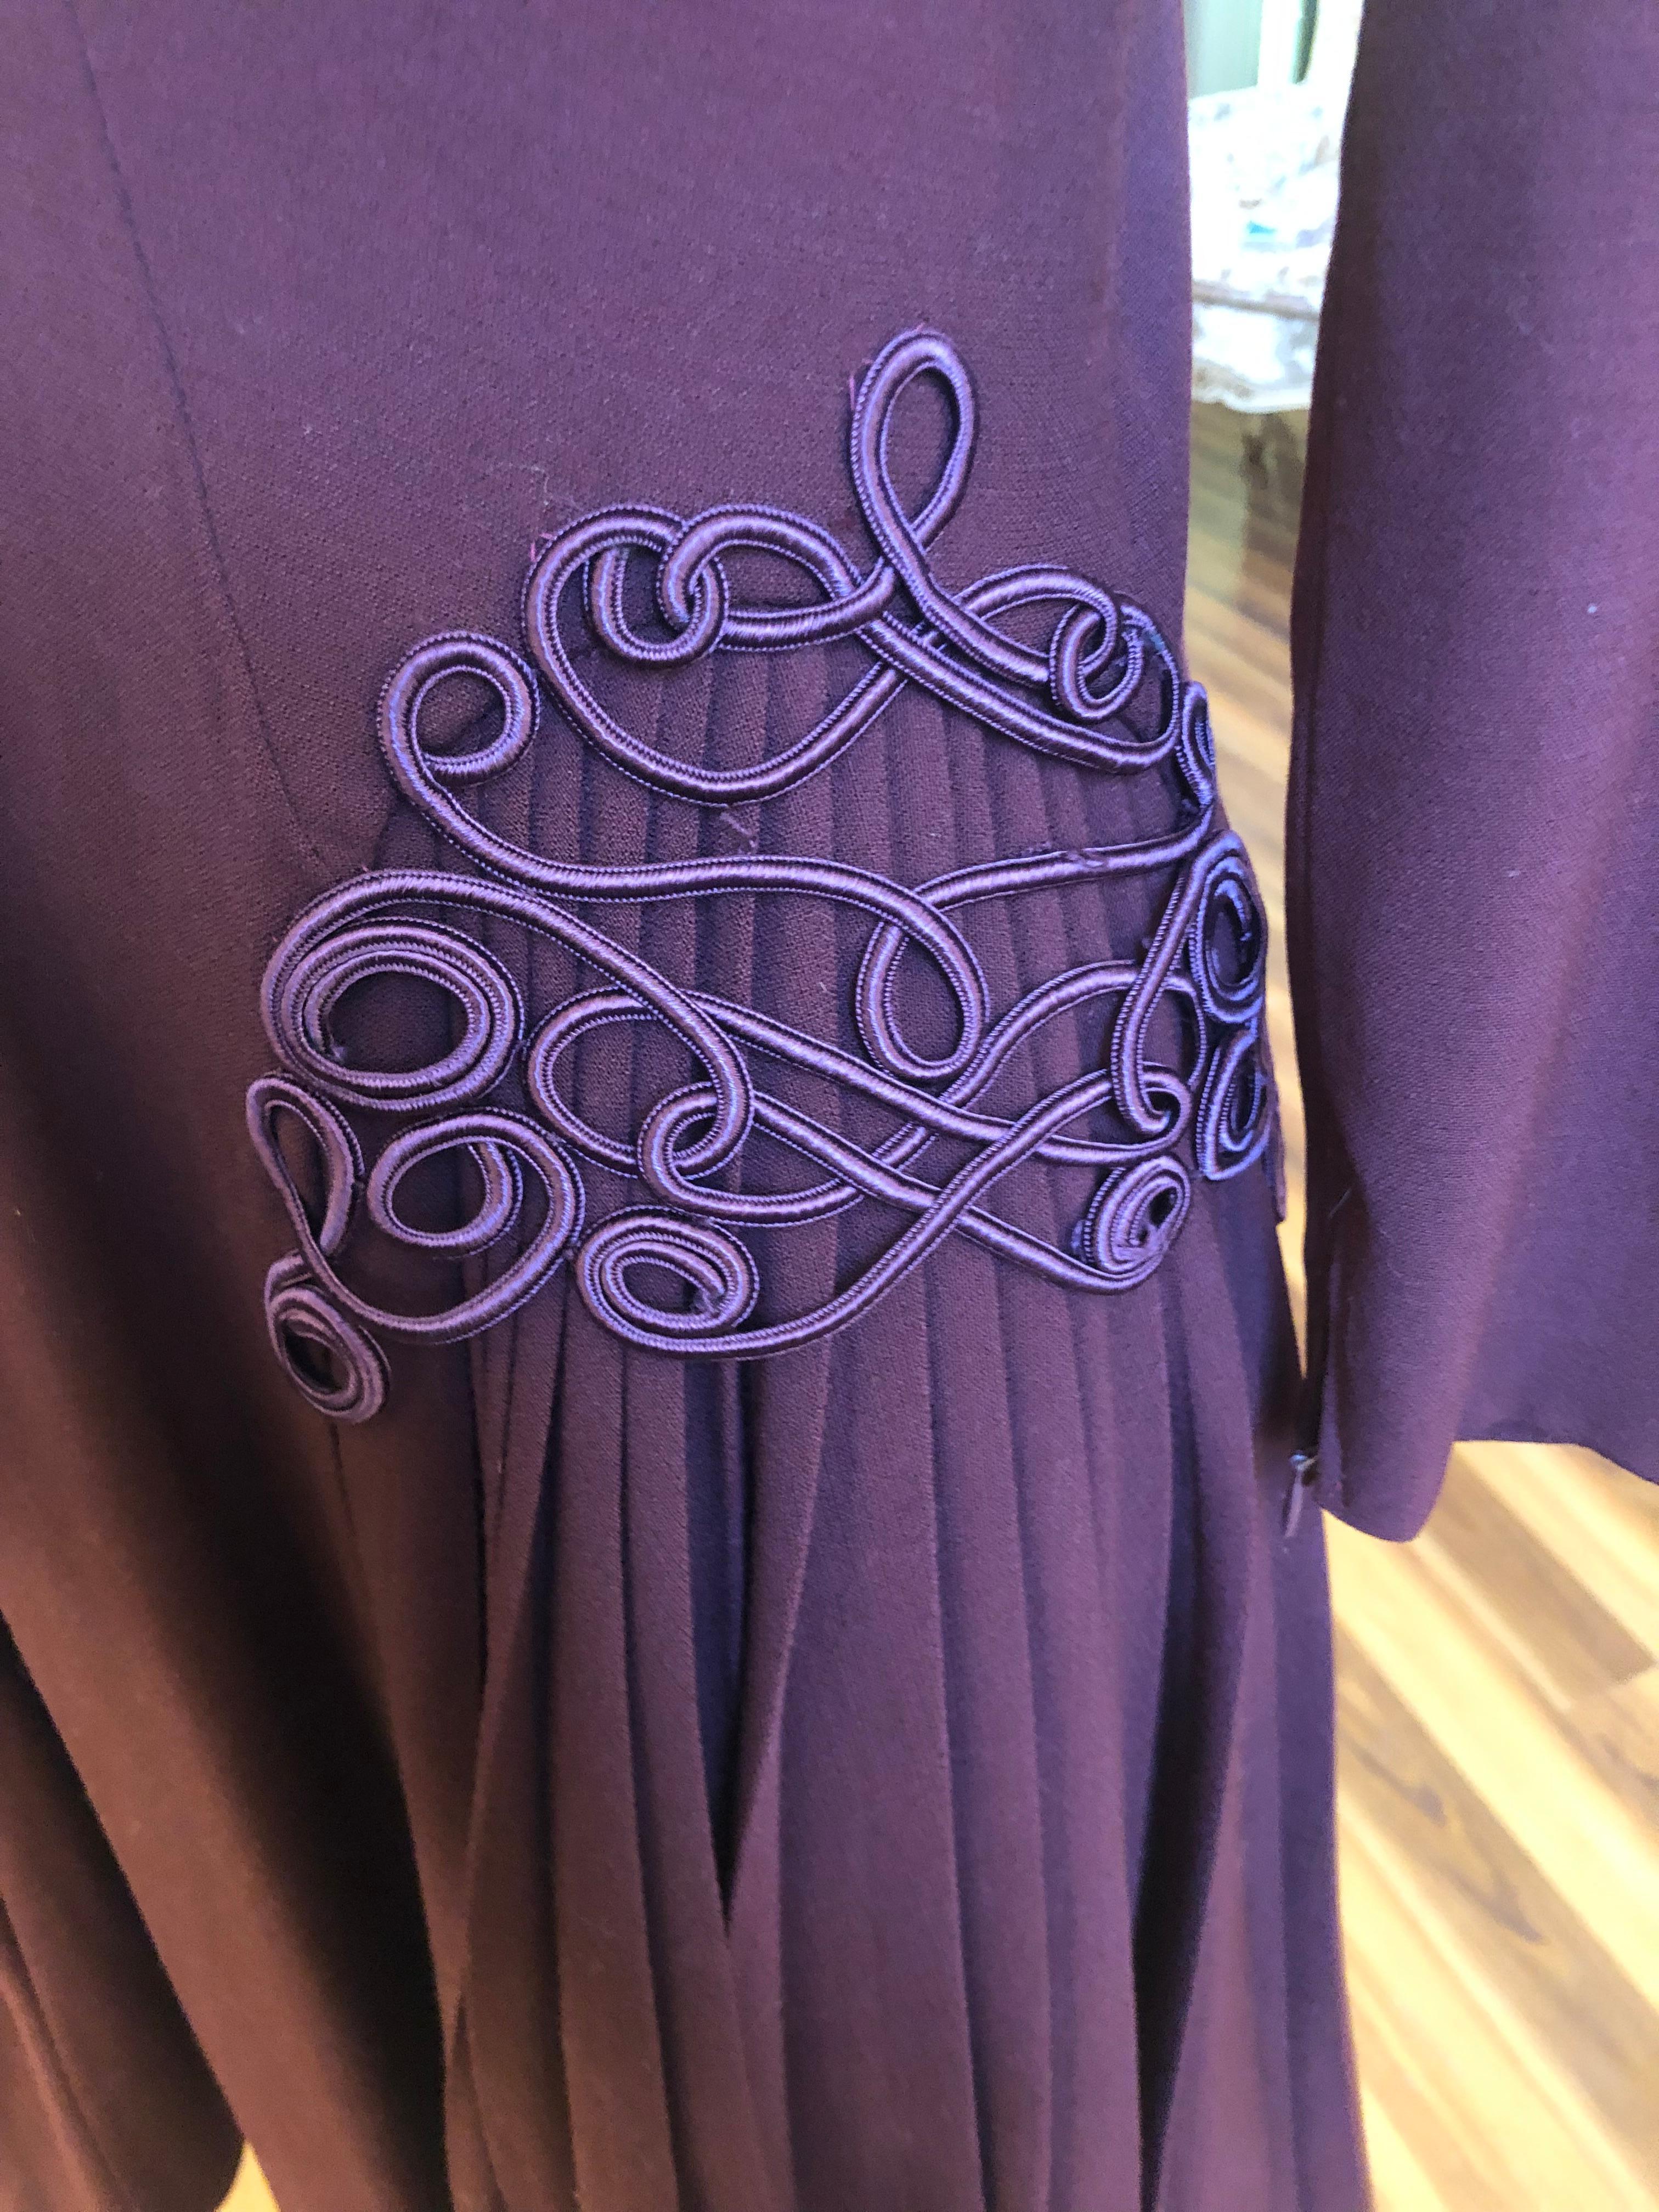 This is an incredible 1940s  Jacques Fath Dress (Jacques Fath passed away in 1954) in excellent condition. Some of the details are decorative braiding; soft pleats; longer side hems; darting, and zips at cuffs.

The color is aubergine, and there is